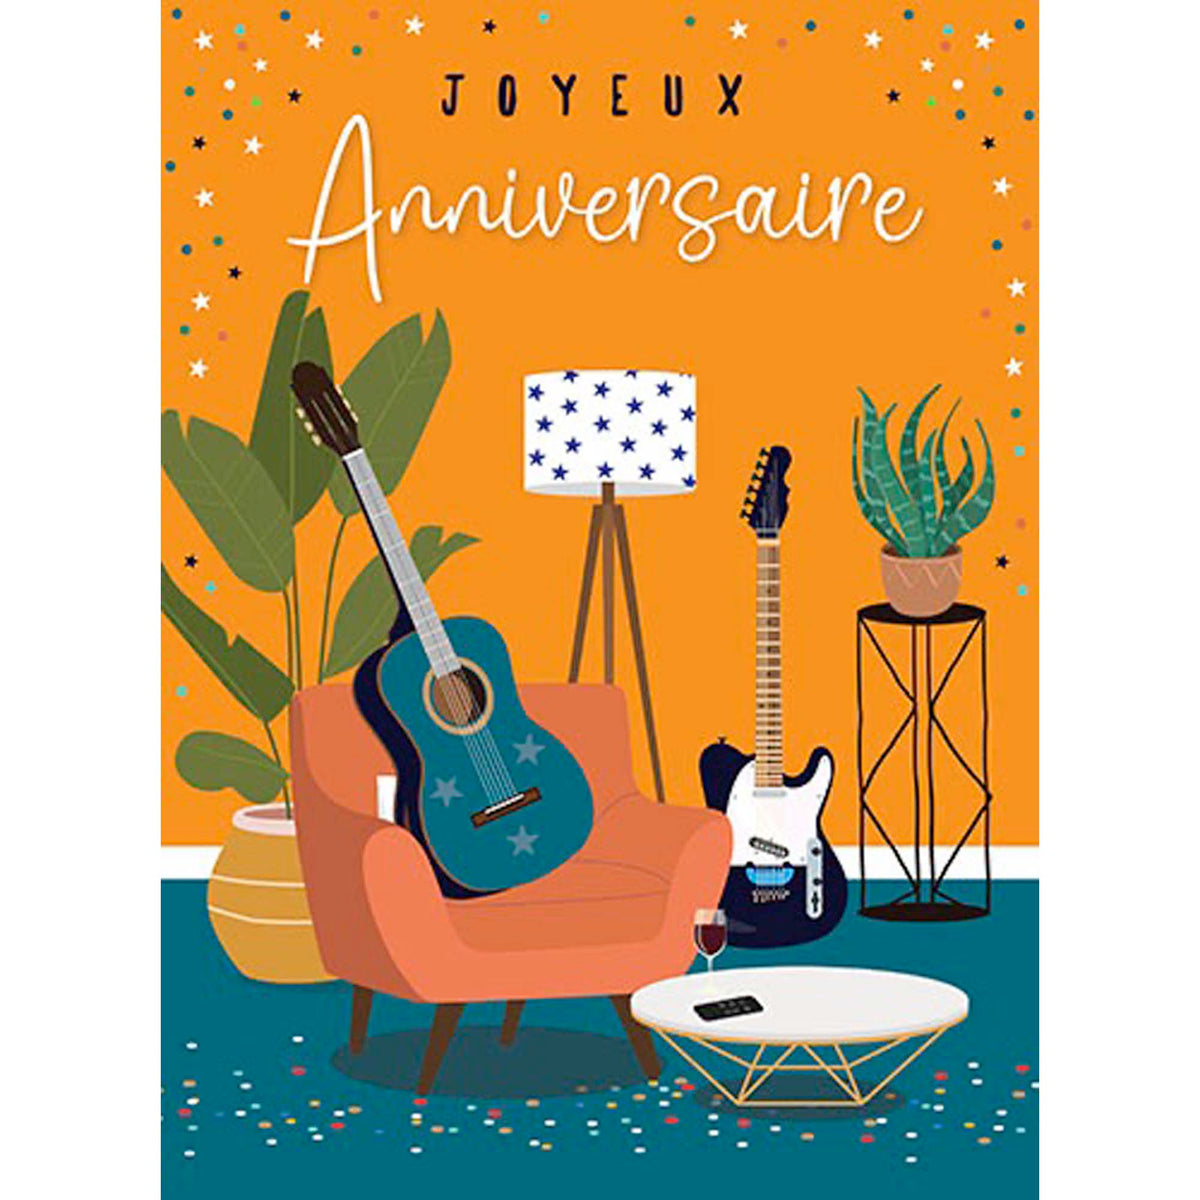 DISTRIBUTION INCOGNITO Greeting Cards Giant Birthday Card, "Joyeux Anniversaire", 1 Count